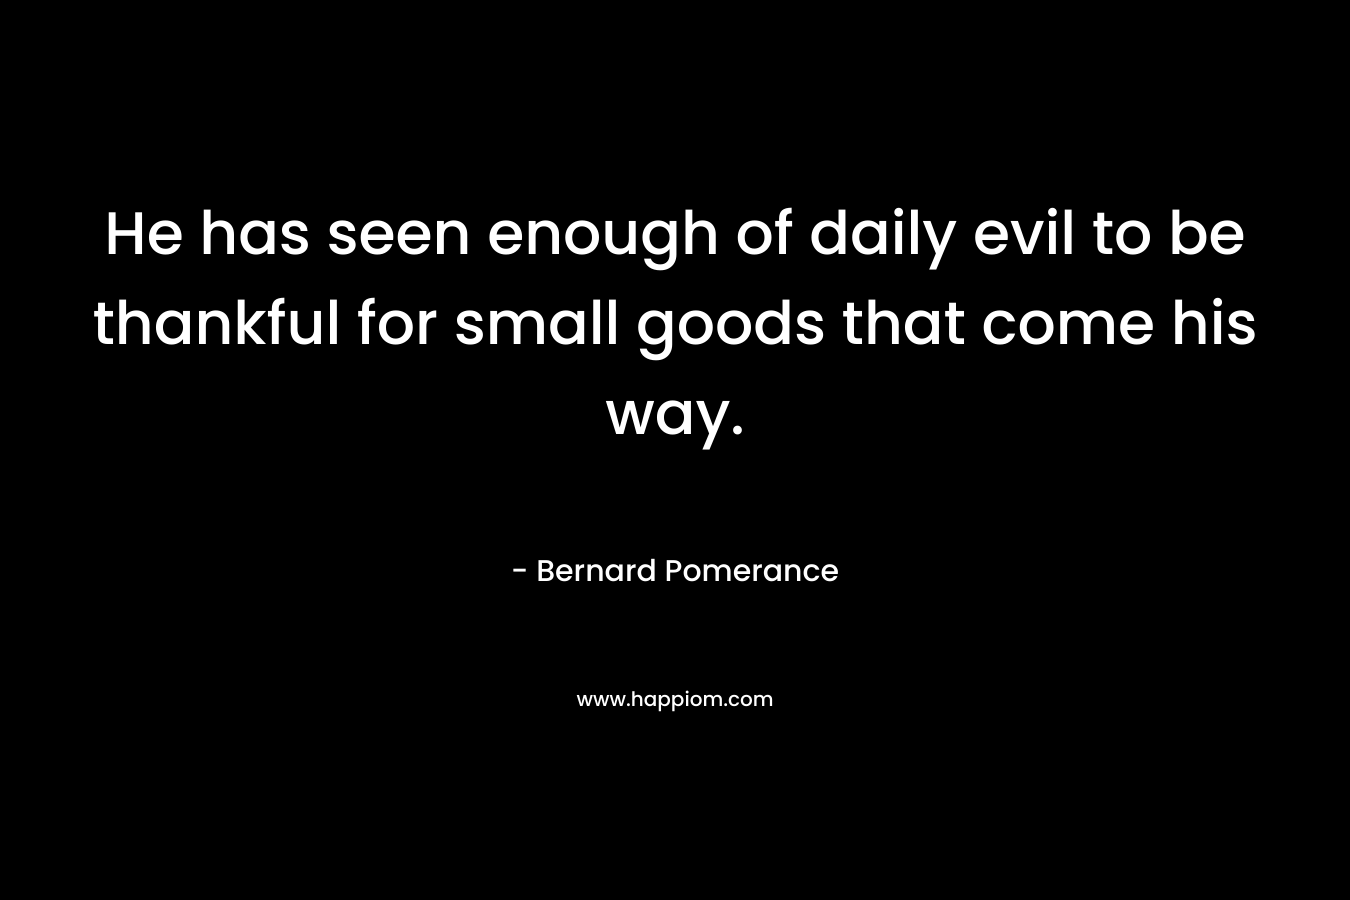 He has seen enough of daily evil to be thankful for small goods that come his way. – Bernard Pomerance